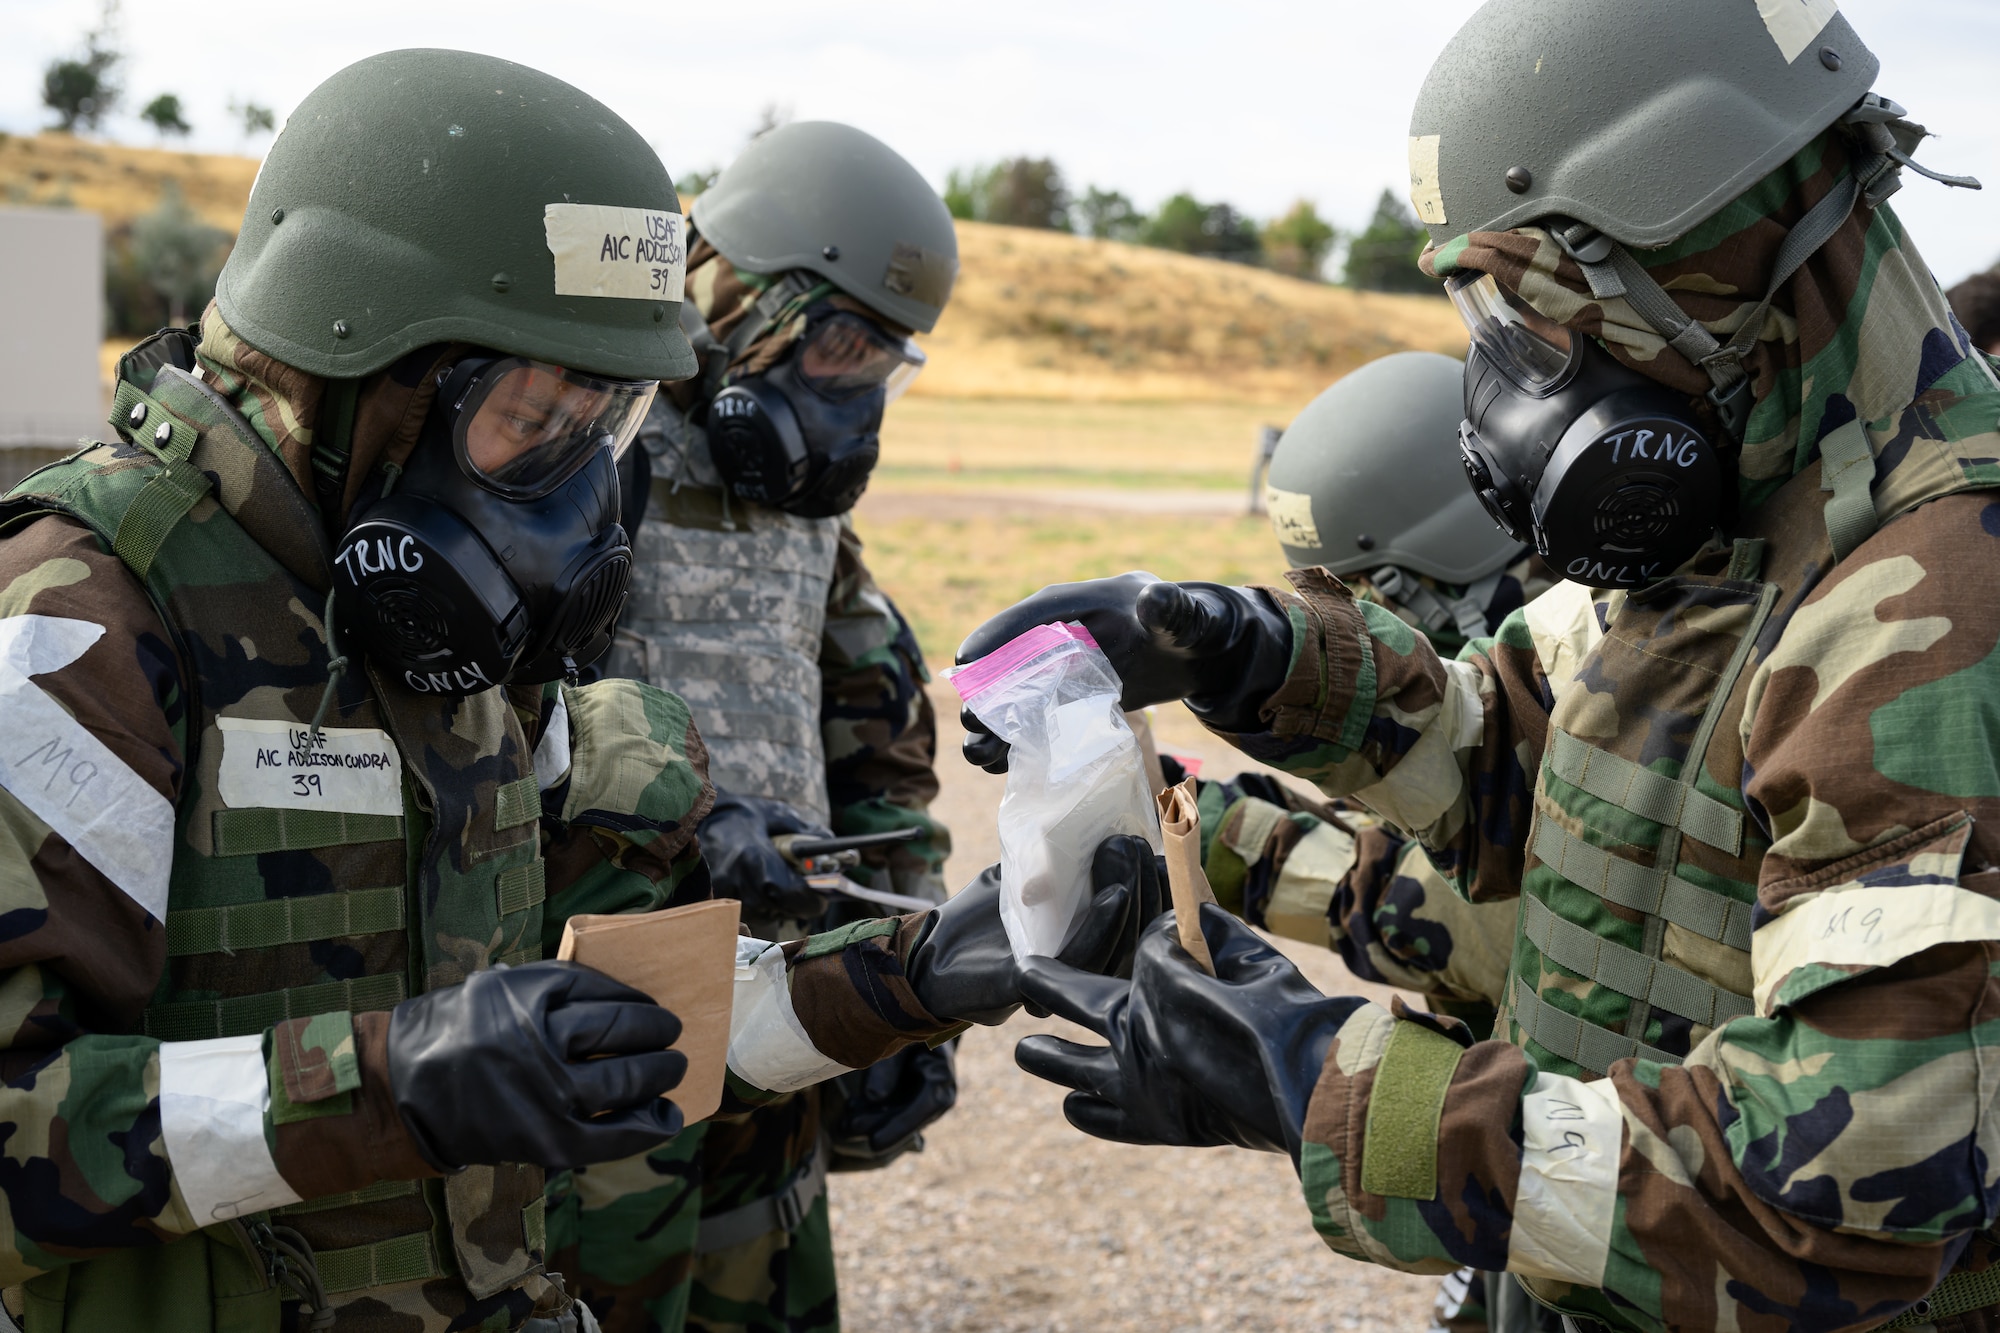 Airmen conduct decontamination procedures during a Phase 2 exercise at Hill Air Force Base, Utah, Sept 14, 2022.